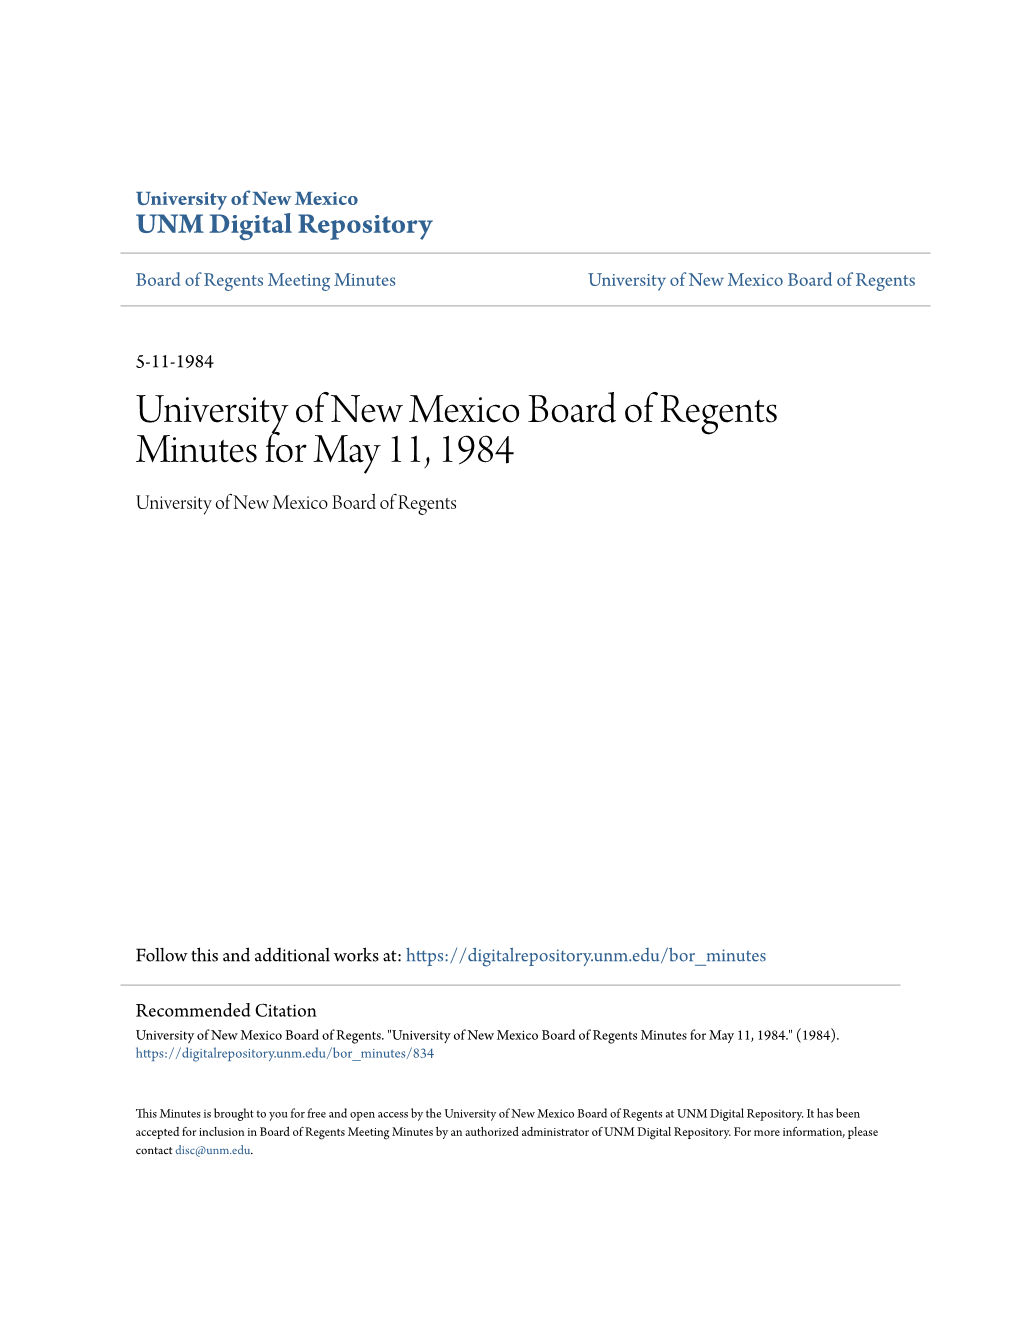 University of New Mexico Board of Regents Minutes for May 11, 1984 University of New Mexico Board of Regents